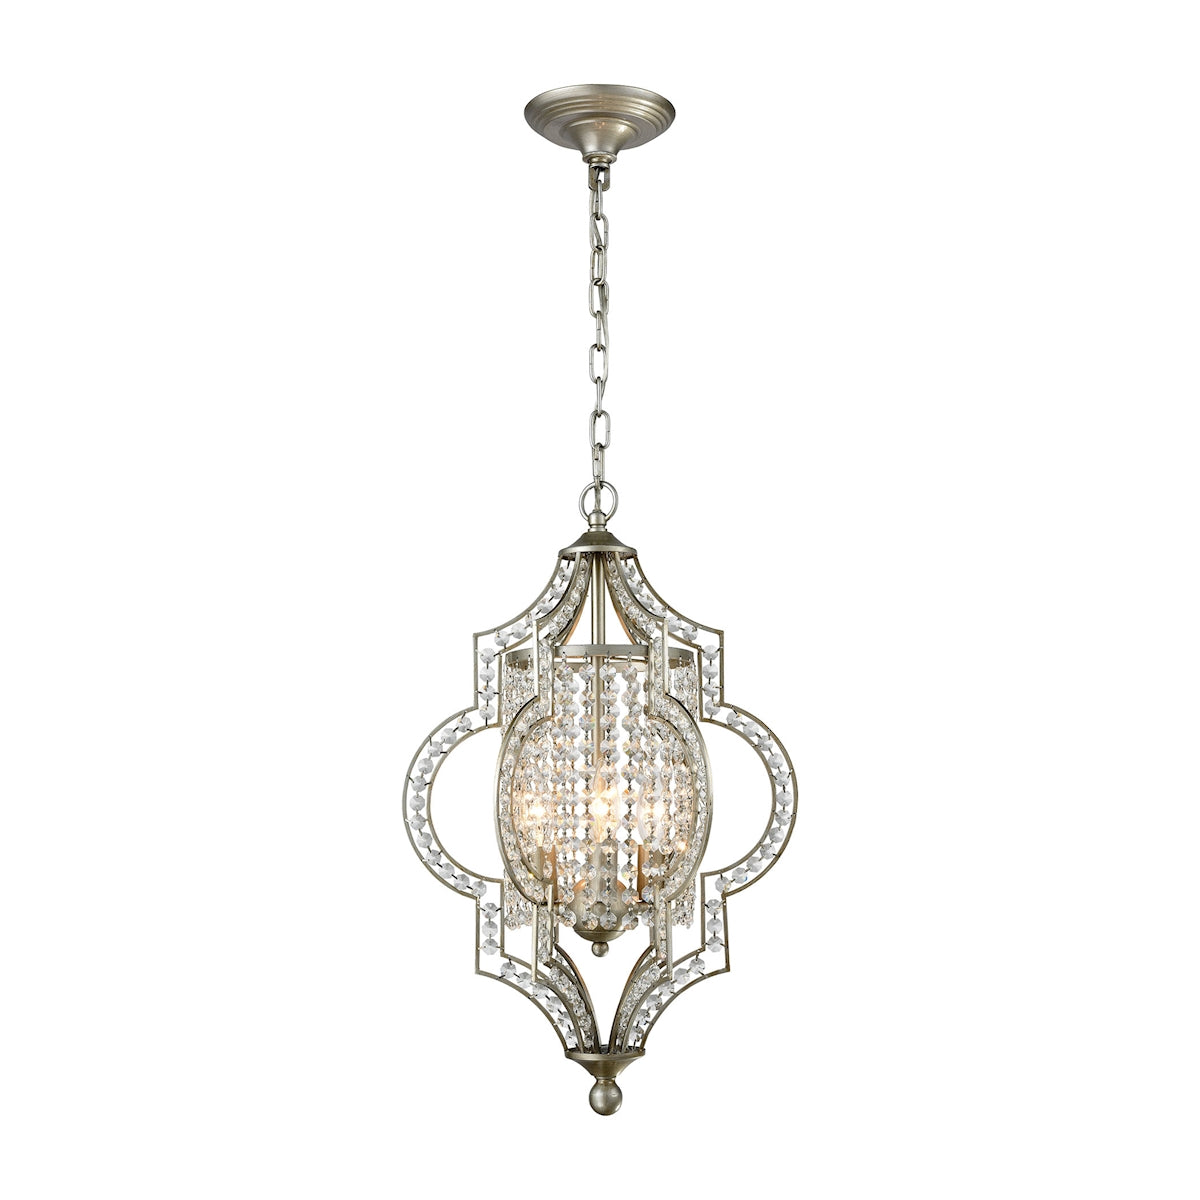 ELK Lighting 16270/3 Gabrielle 3-Light Chandelier in Aged Silver with Clear Crystal